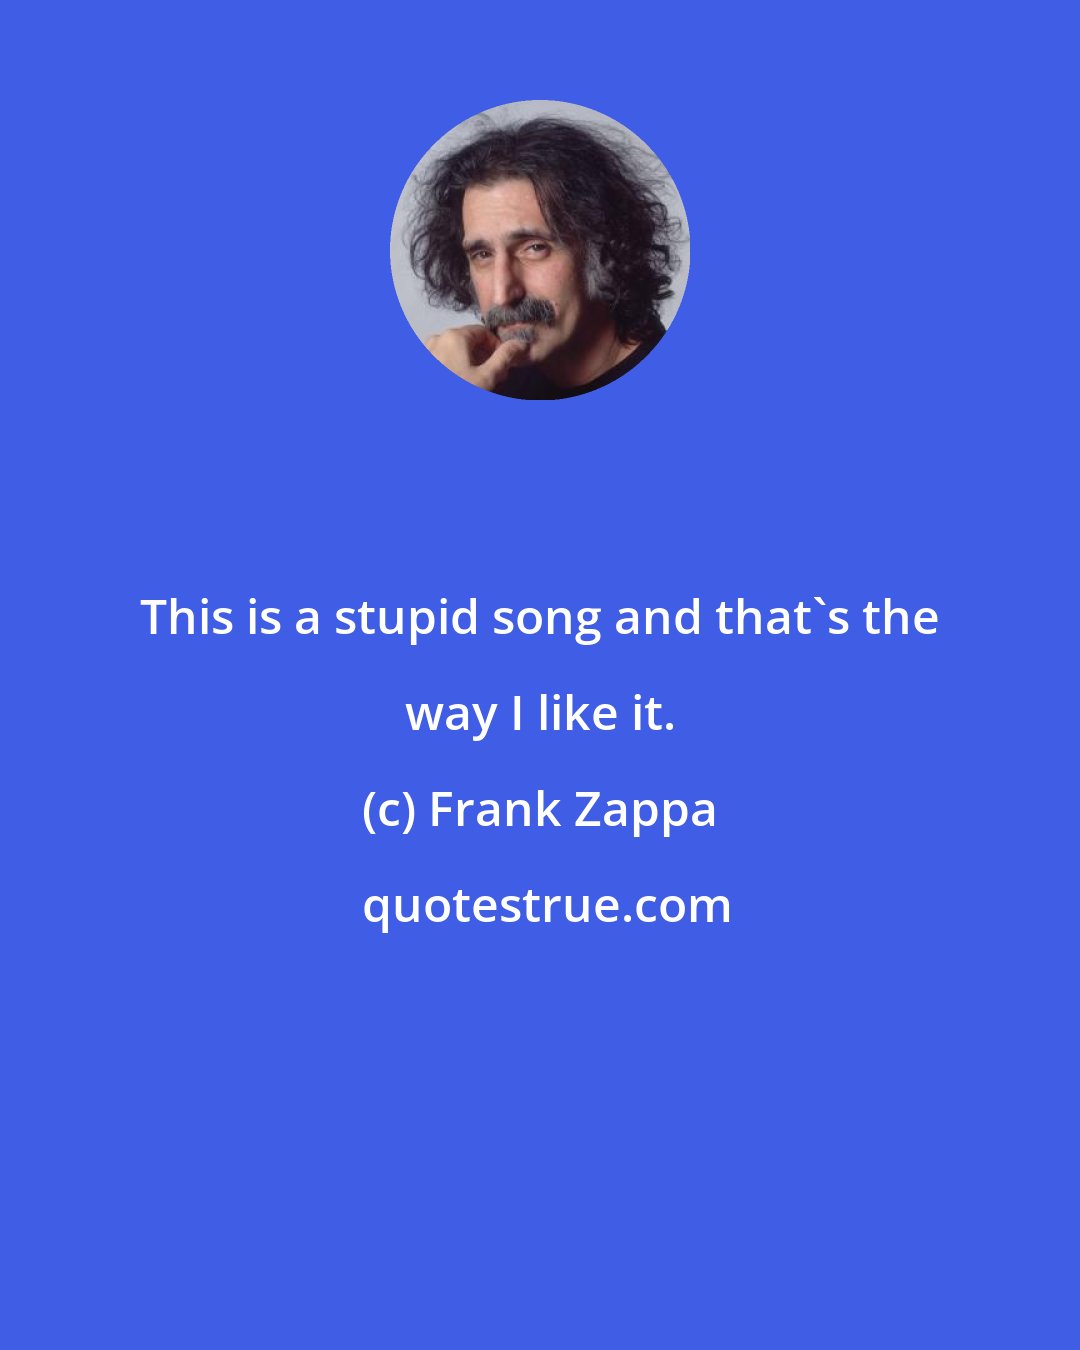 Frank Zappa: This is a stupid song and that's the way I like it.